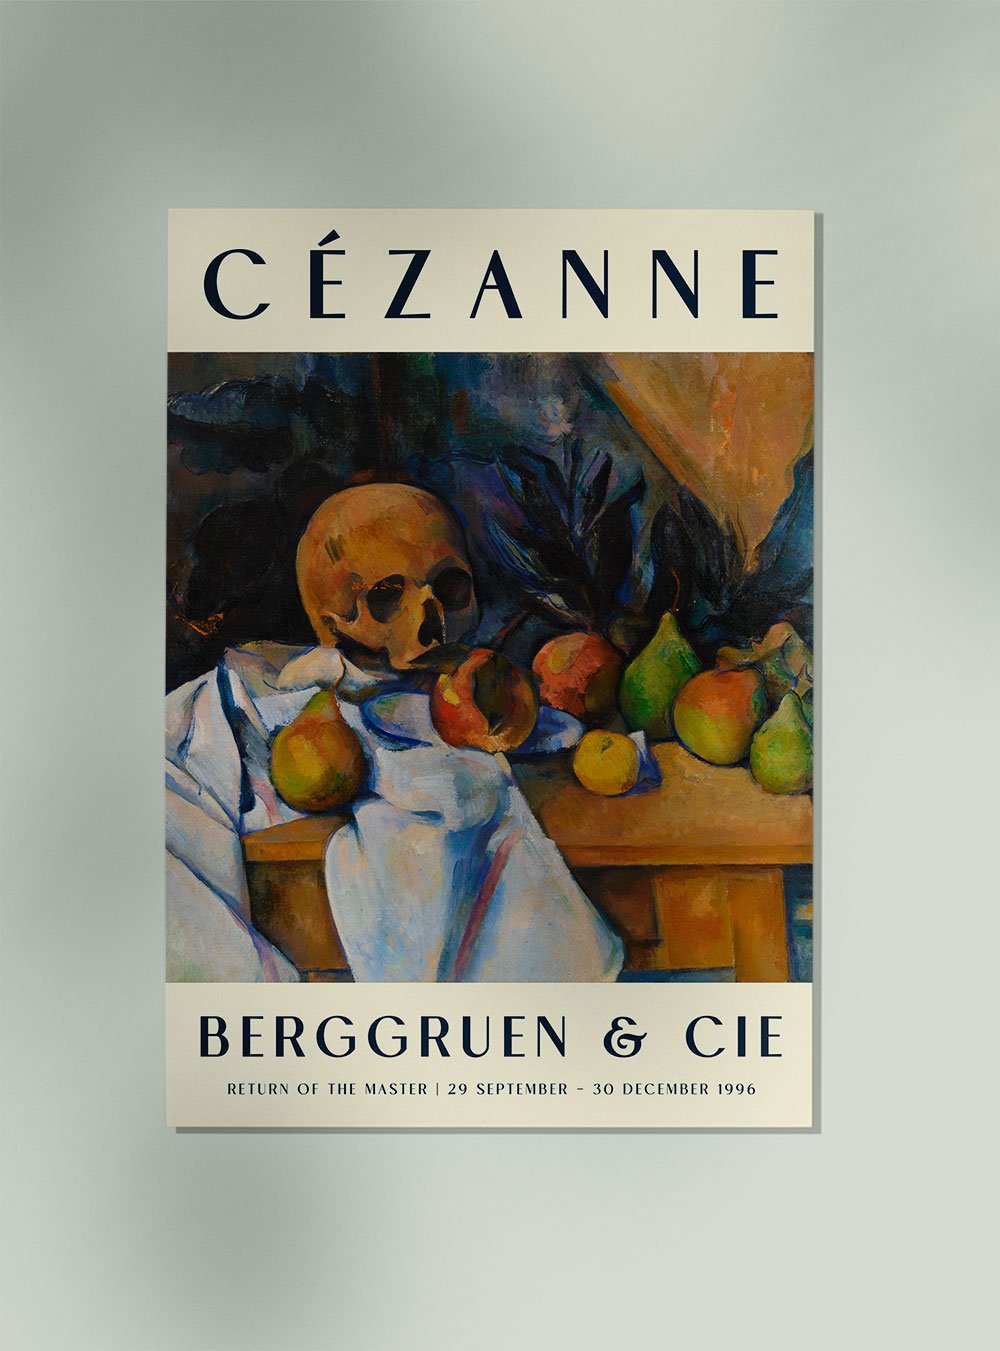 Cézanne Still Life with Skull Art Exhibition Poster